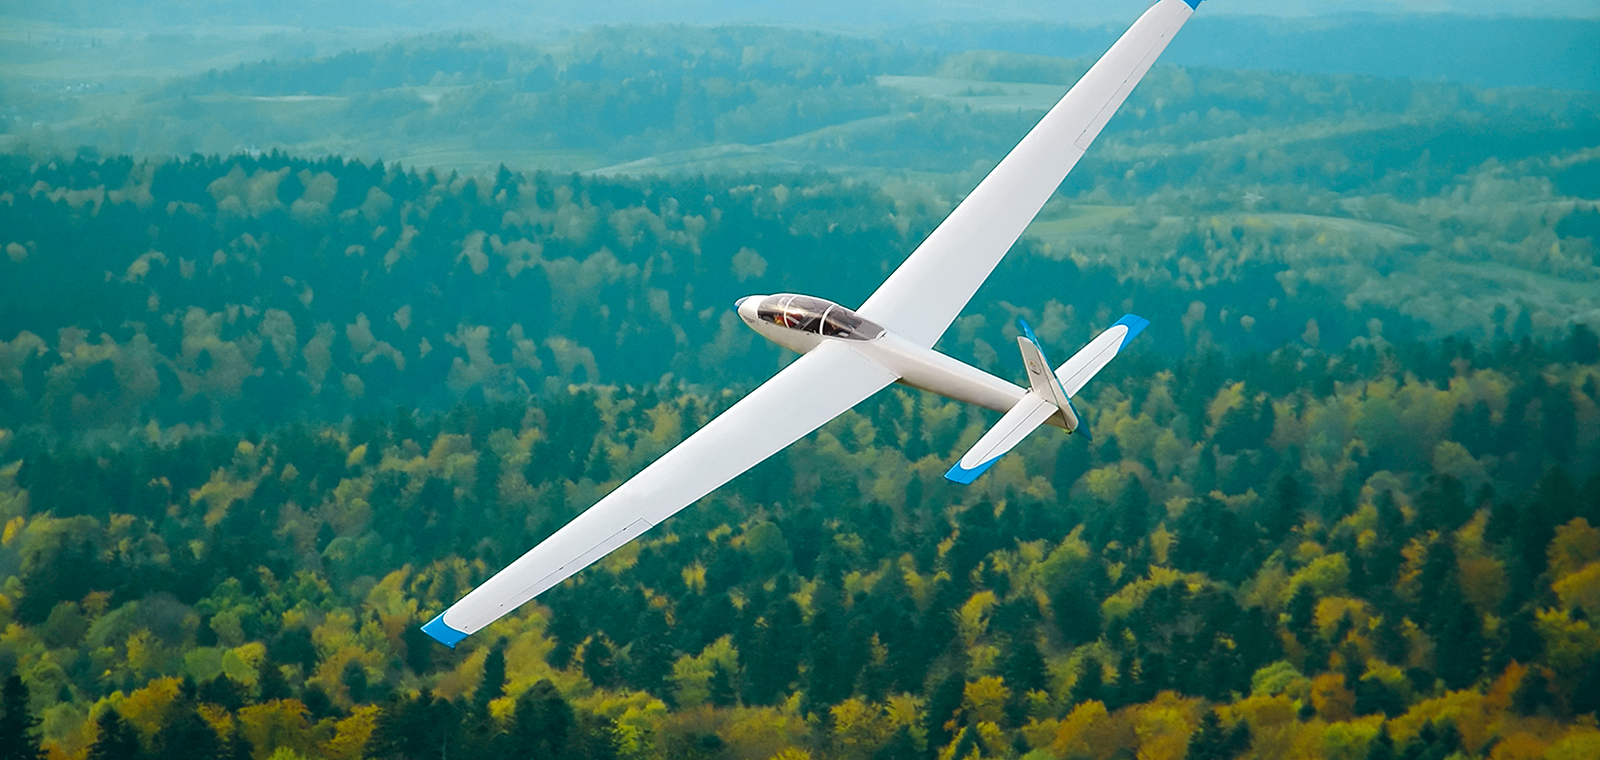 The long, graceful wings of a white glider tilt as the aircraft banks against a background of rolling hills and forests.